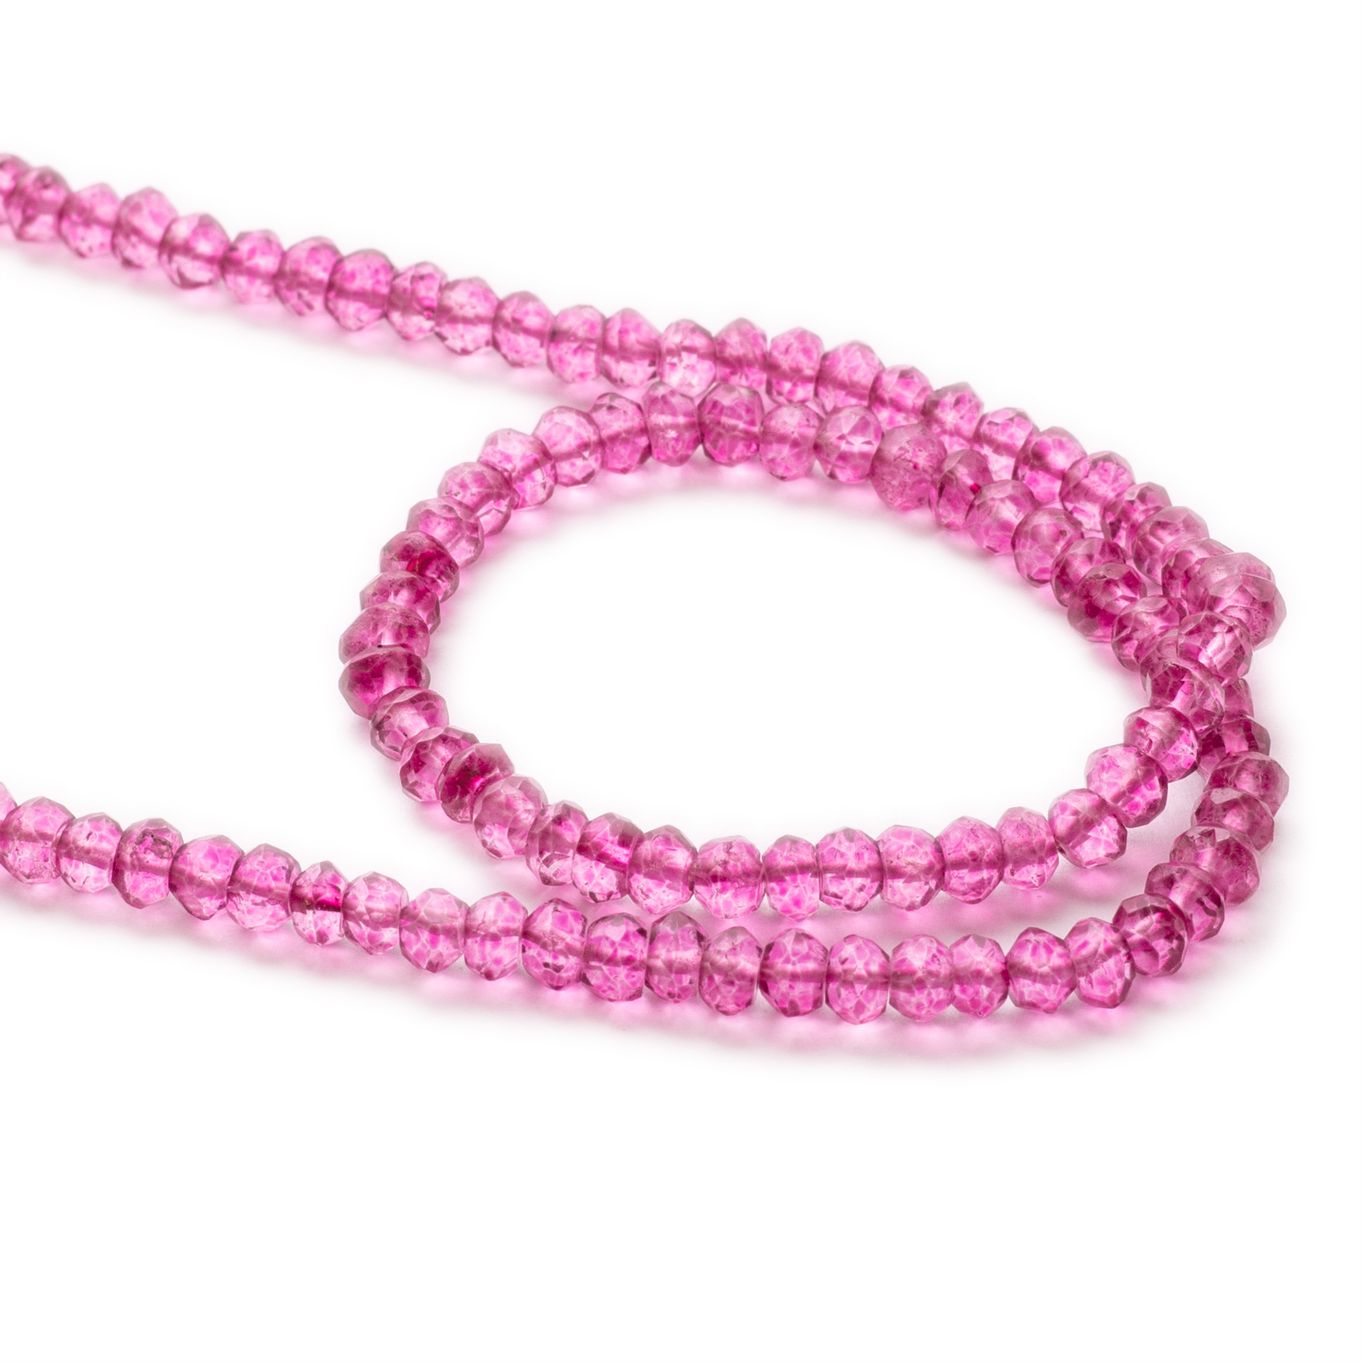 Pink Quartz Faceted Rondelle Beads - Approx 3.5mm, Pack of 10 